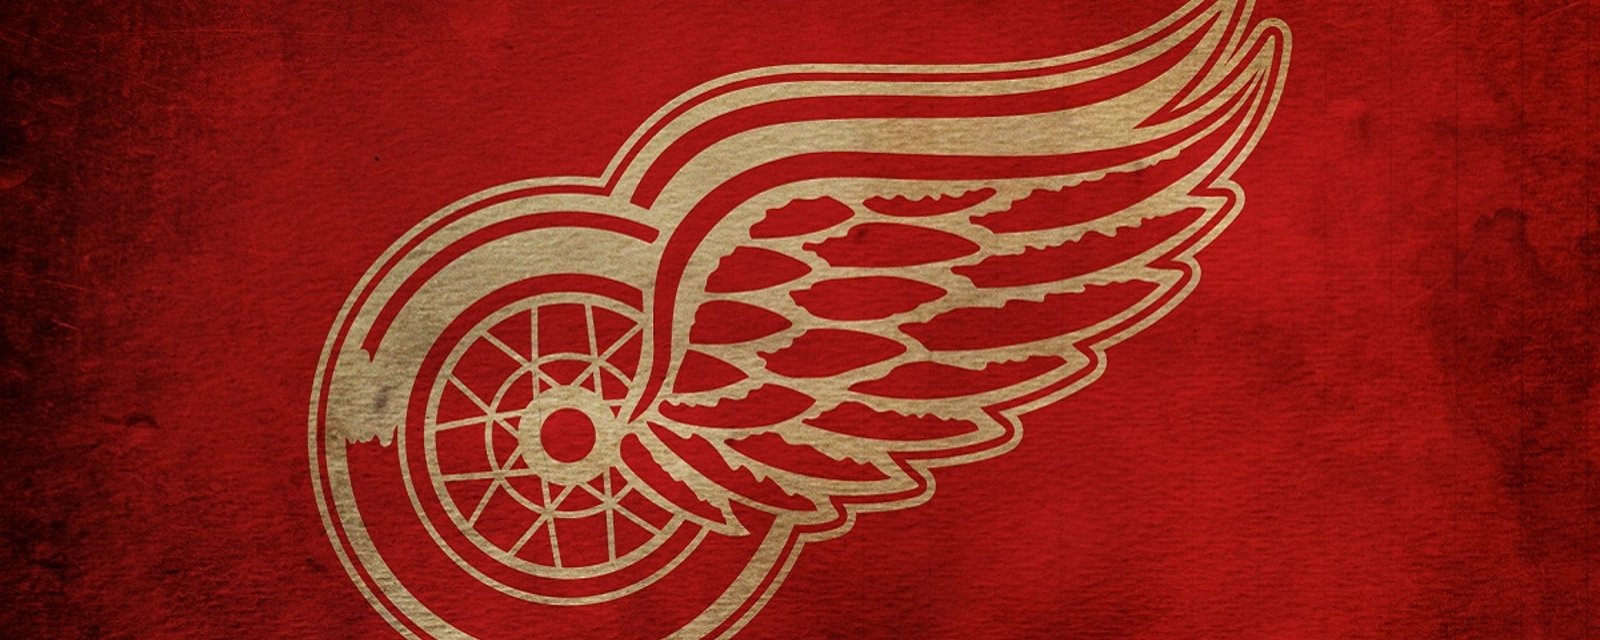 Three reasons why Red Wing fans should pay close attention to the WJC.